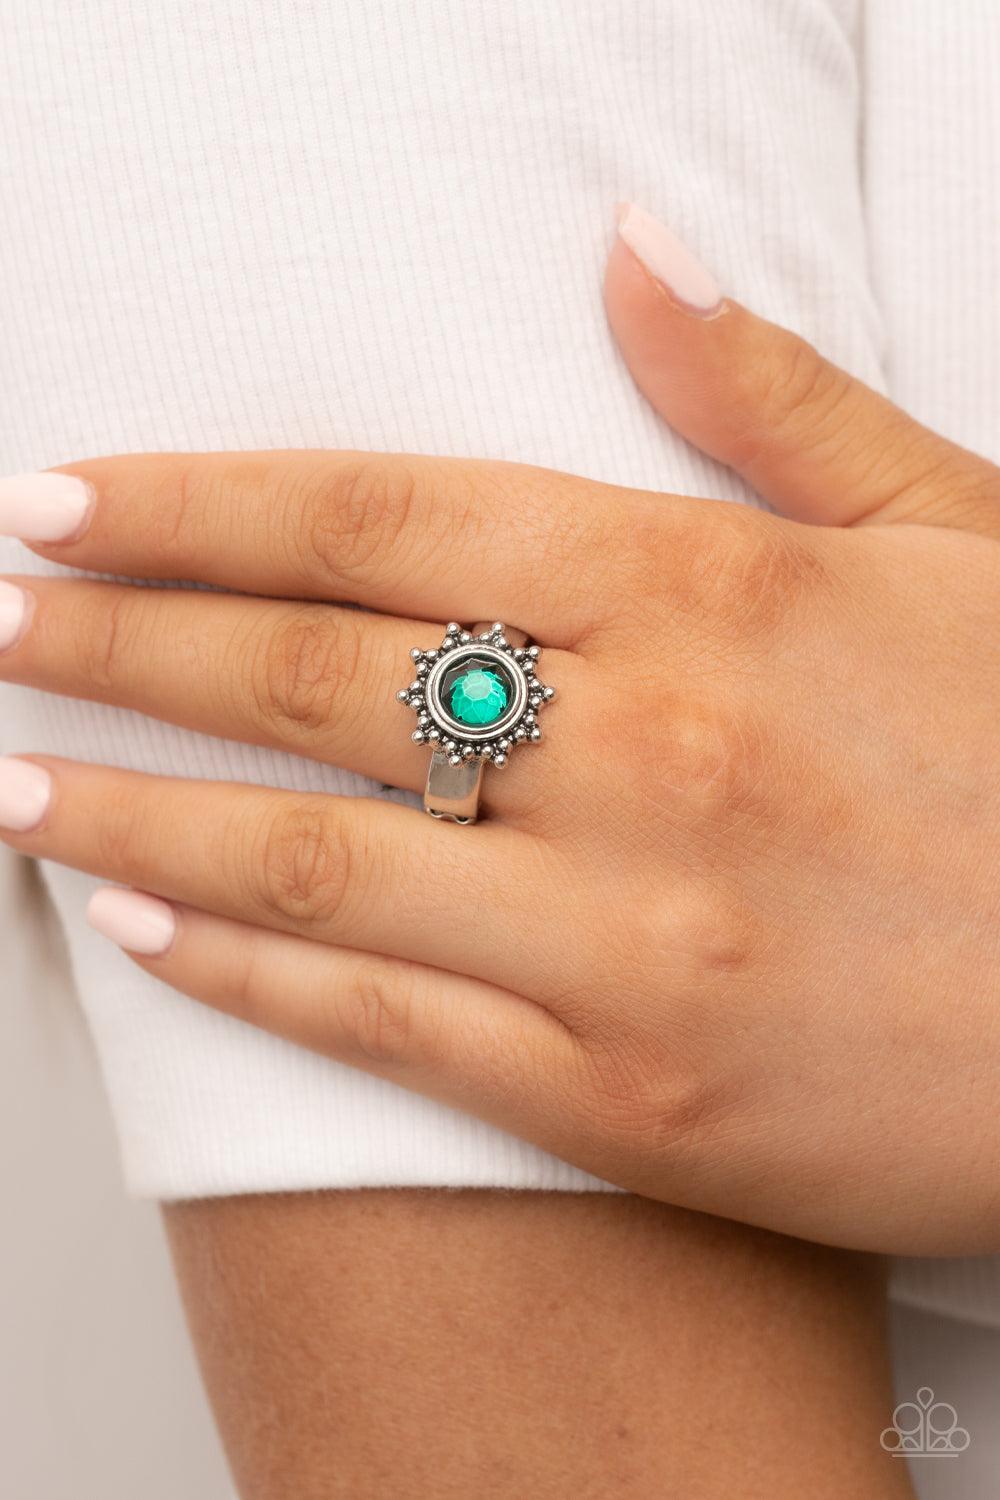 Paparazzi Accessories - Expect Sunshine and REIGN - Green Ring -Suz-Bling-Shop - Suz Bling Shop